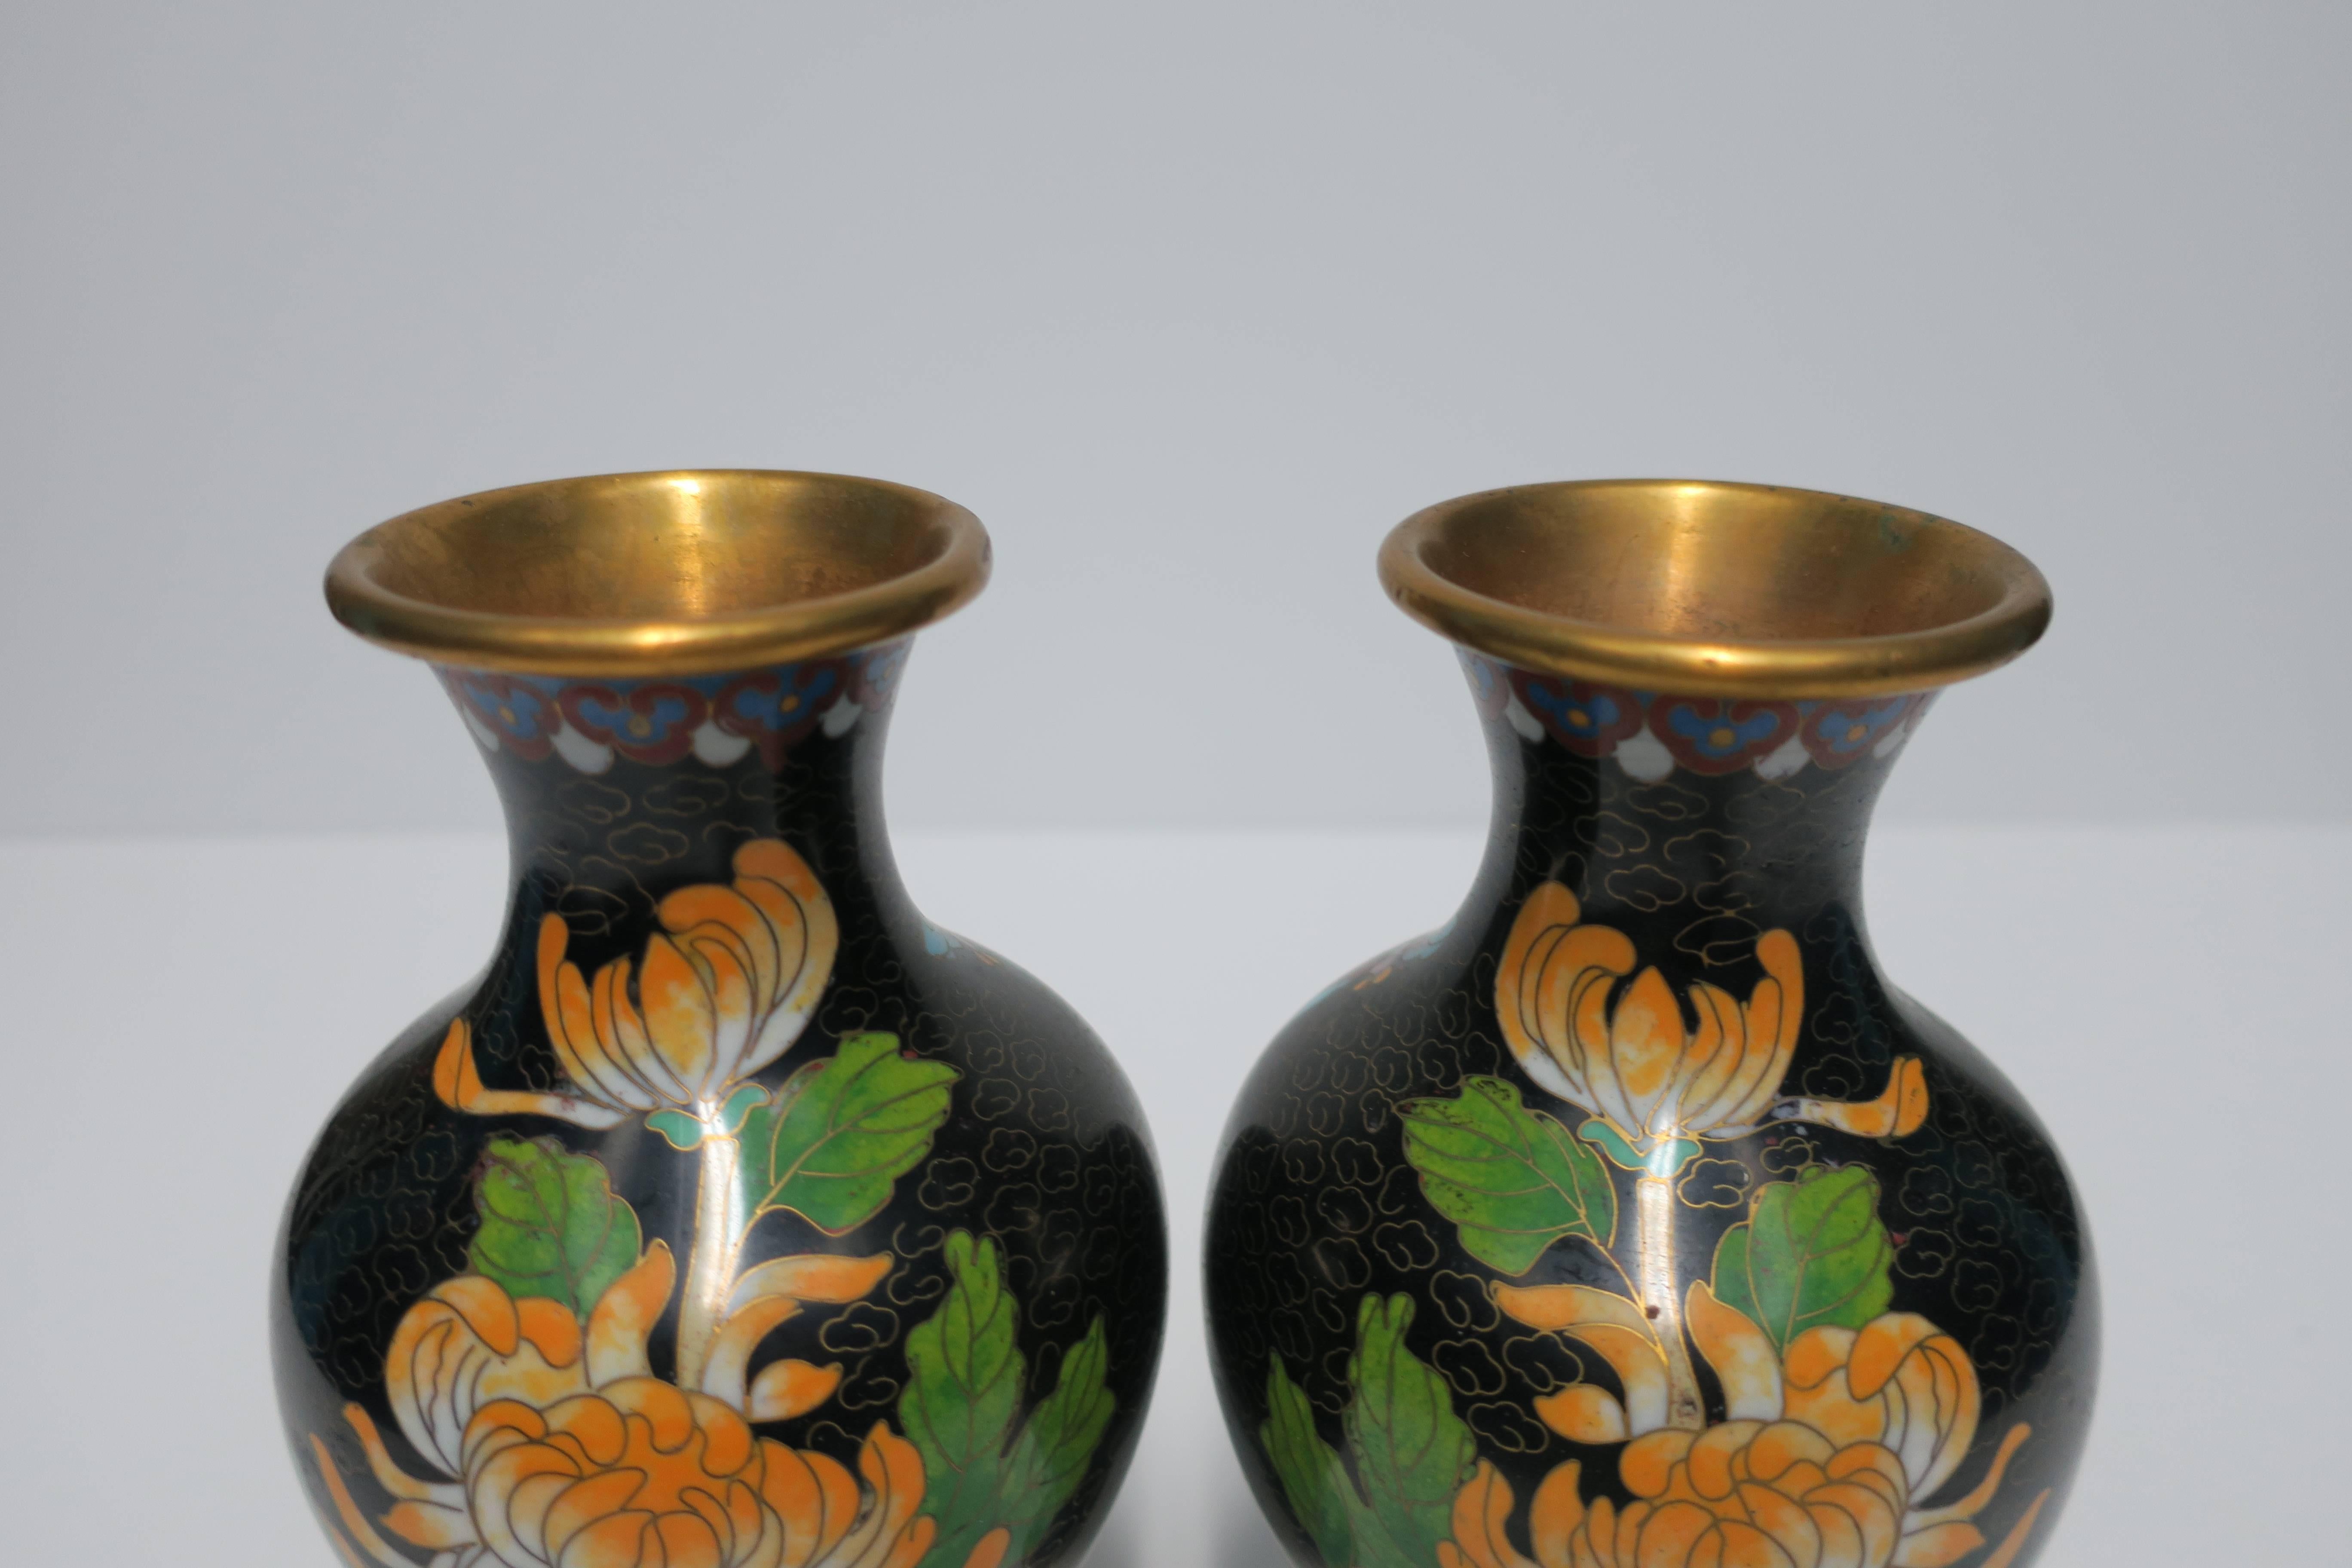 Black and Green Cloisonné́ Enamel and Brass Flower Vases, Pair For Sale 1